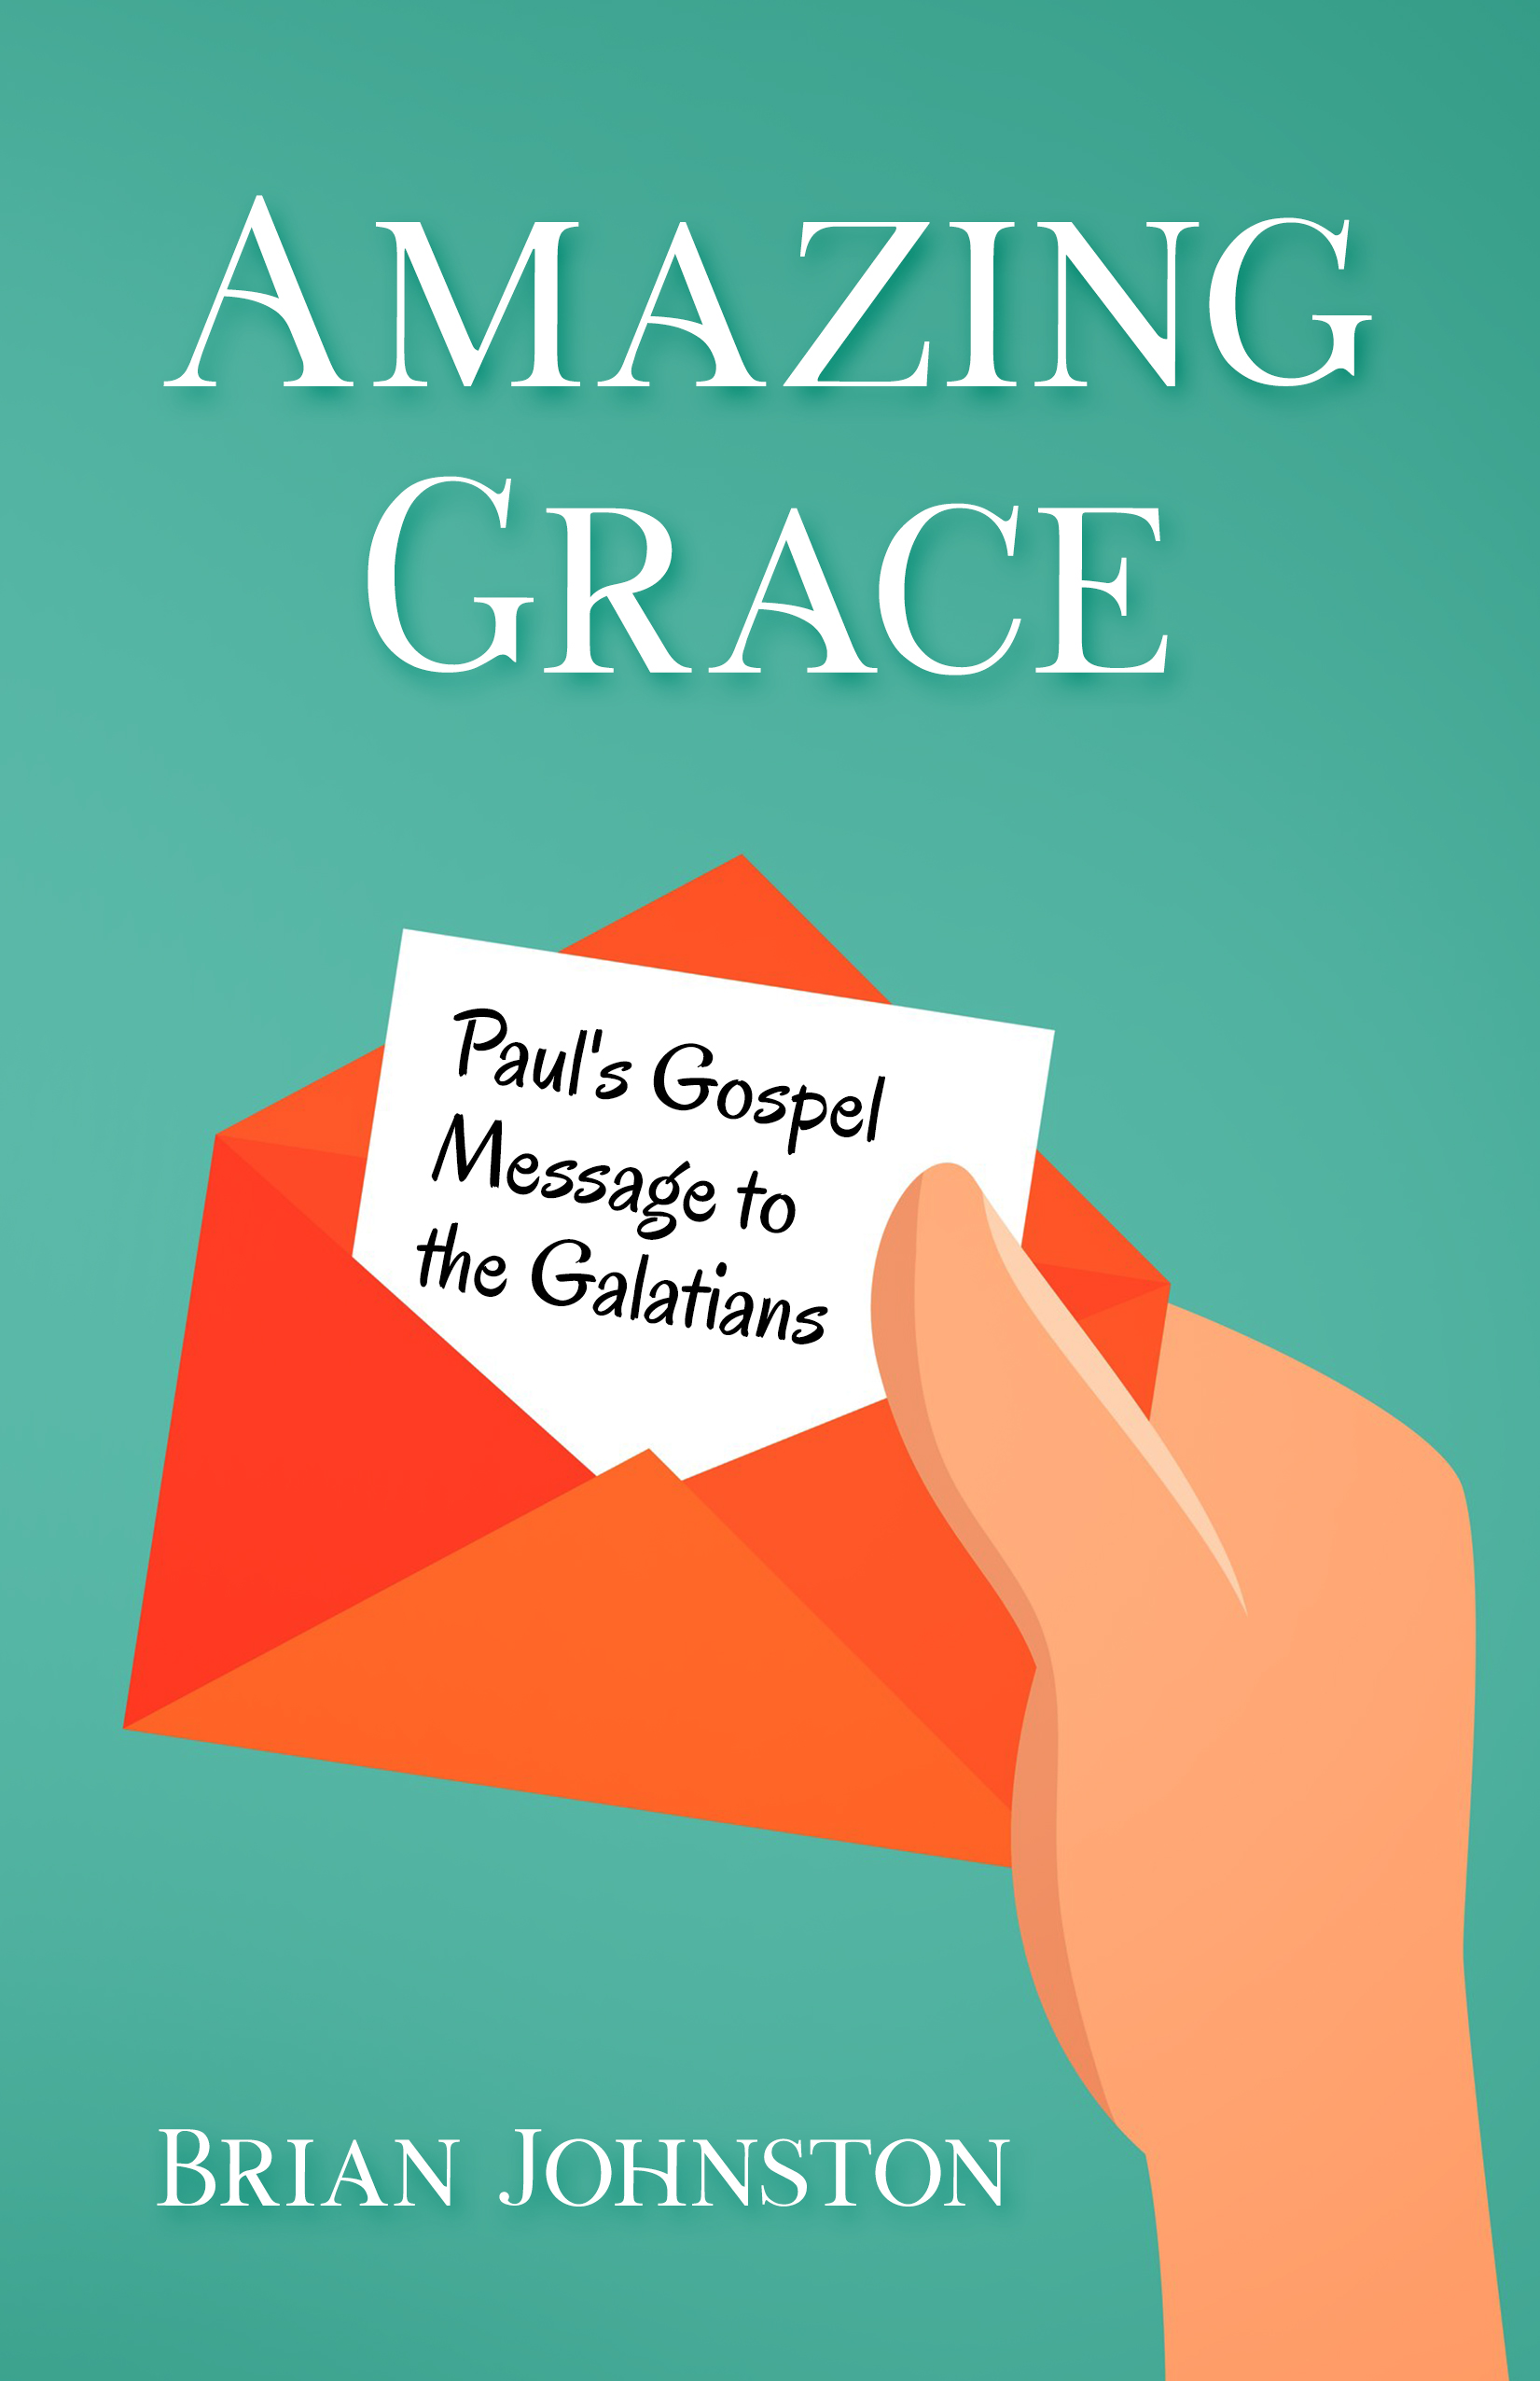 Amazing Grace! Paul's Gospel Message to the Galatians - Part 4: It All Points To Faith Alone